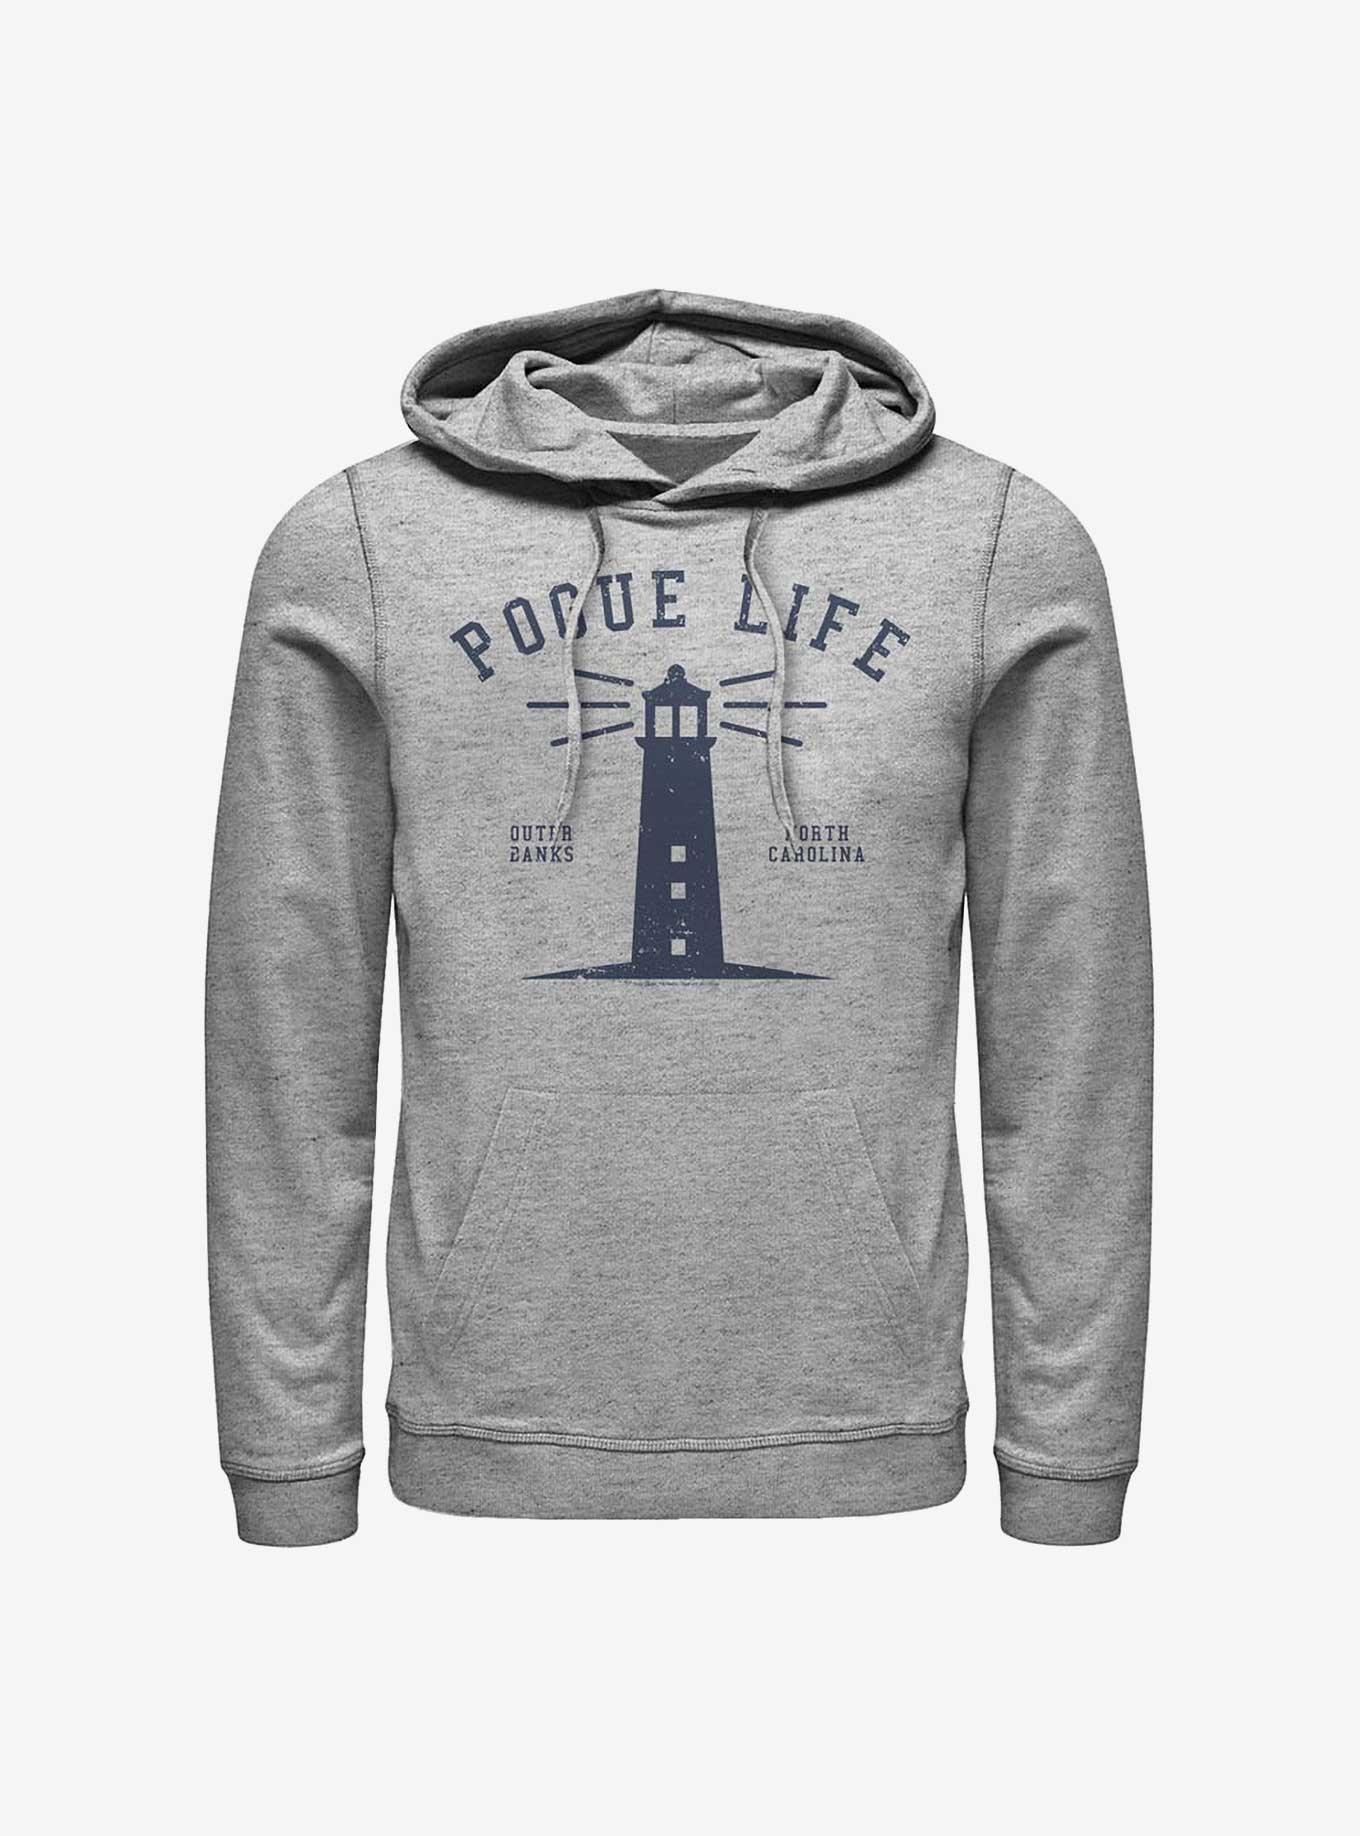 Outer Banks Pogue Life Lifehouse Hoodie